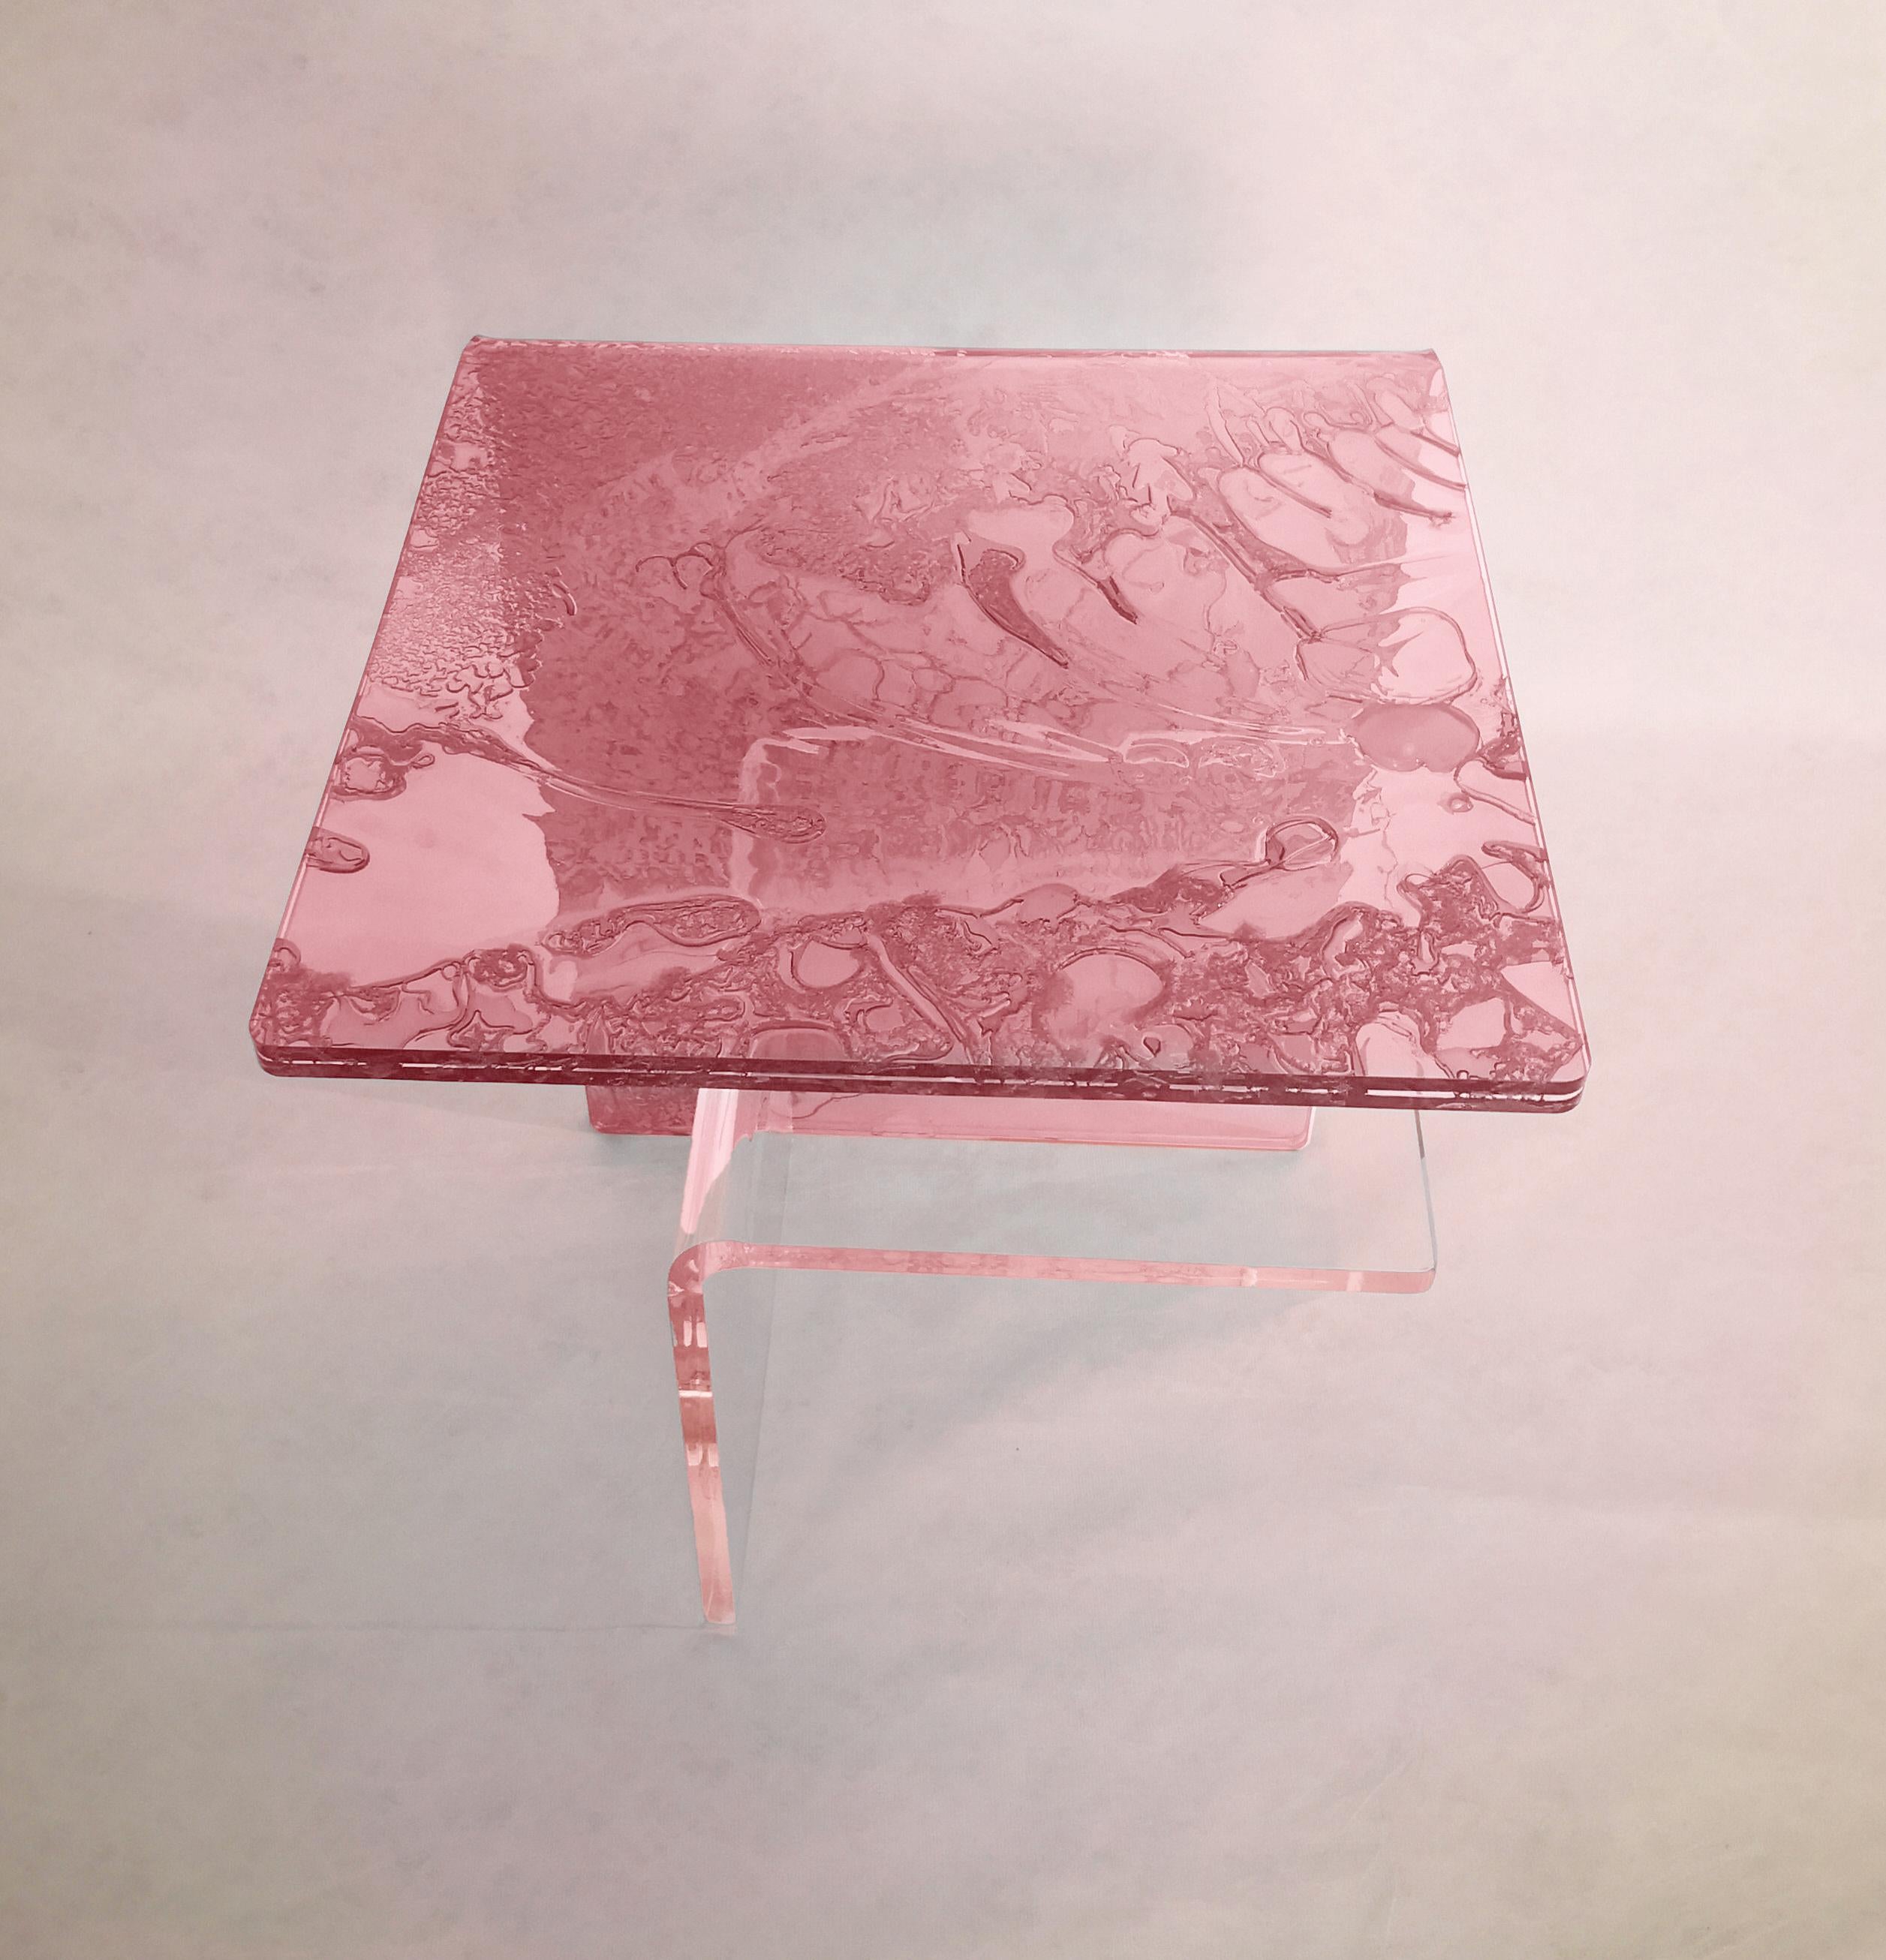 Italian Sketch Elle Sidetable Made of Pink Acrylic Des, Roberto Giacomucci in 2022 For Sale